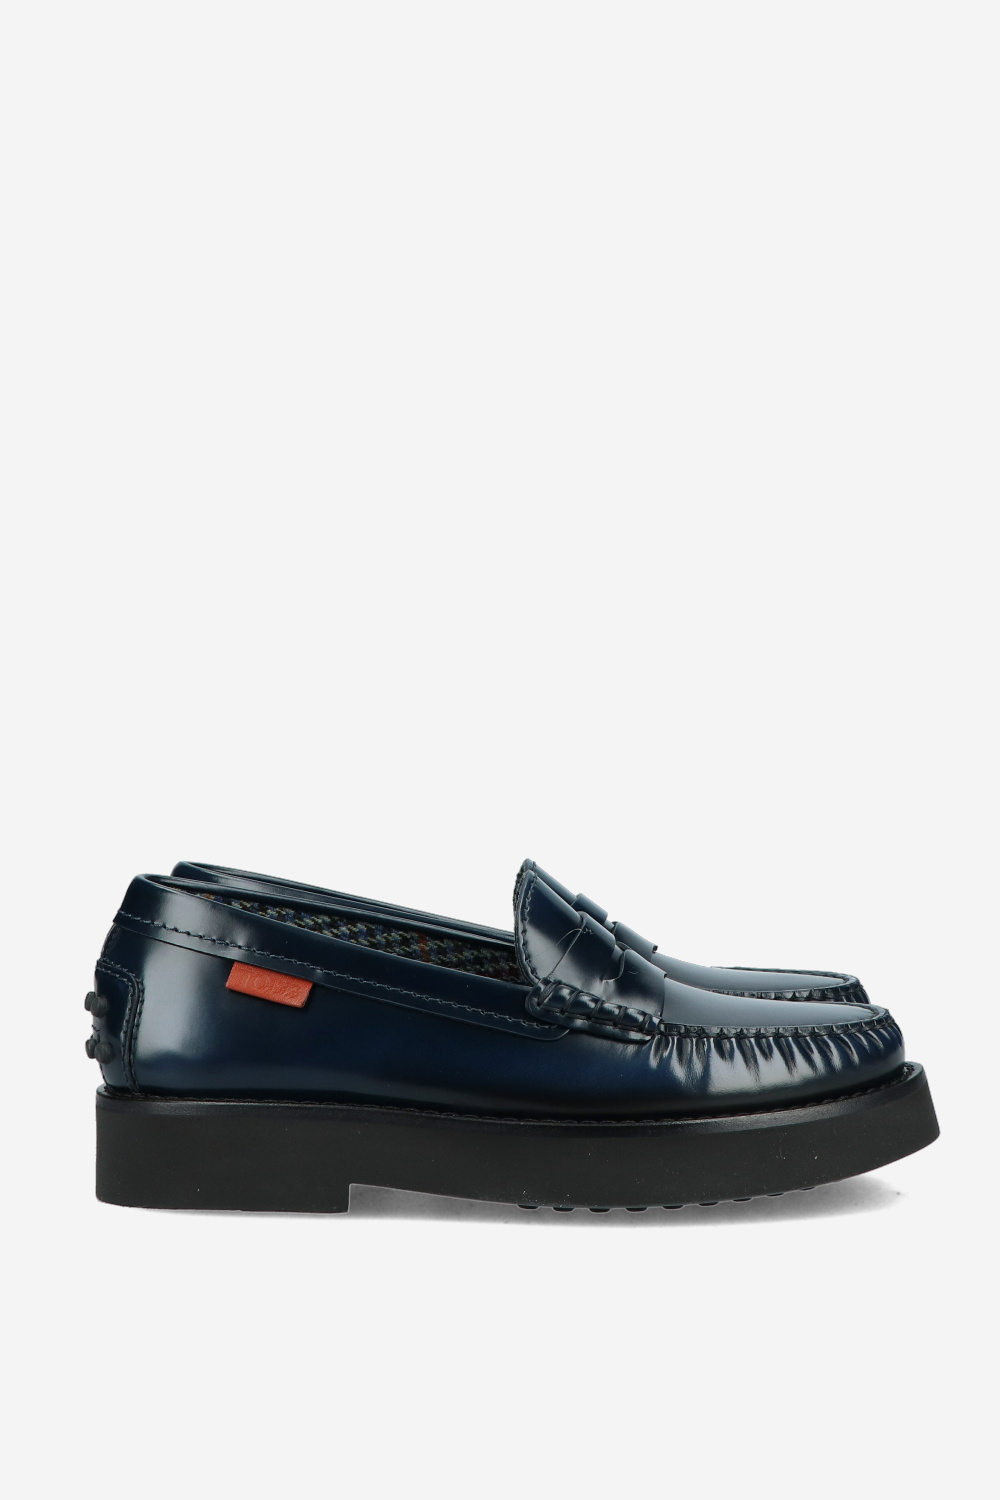 Tods Loafers Blue